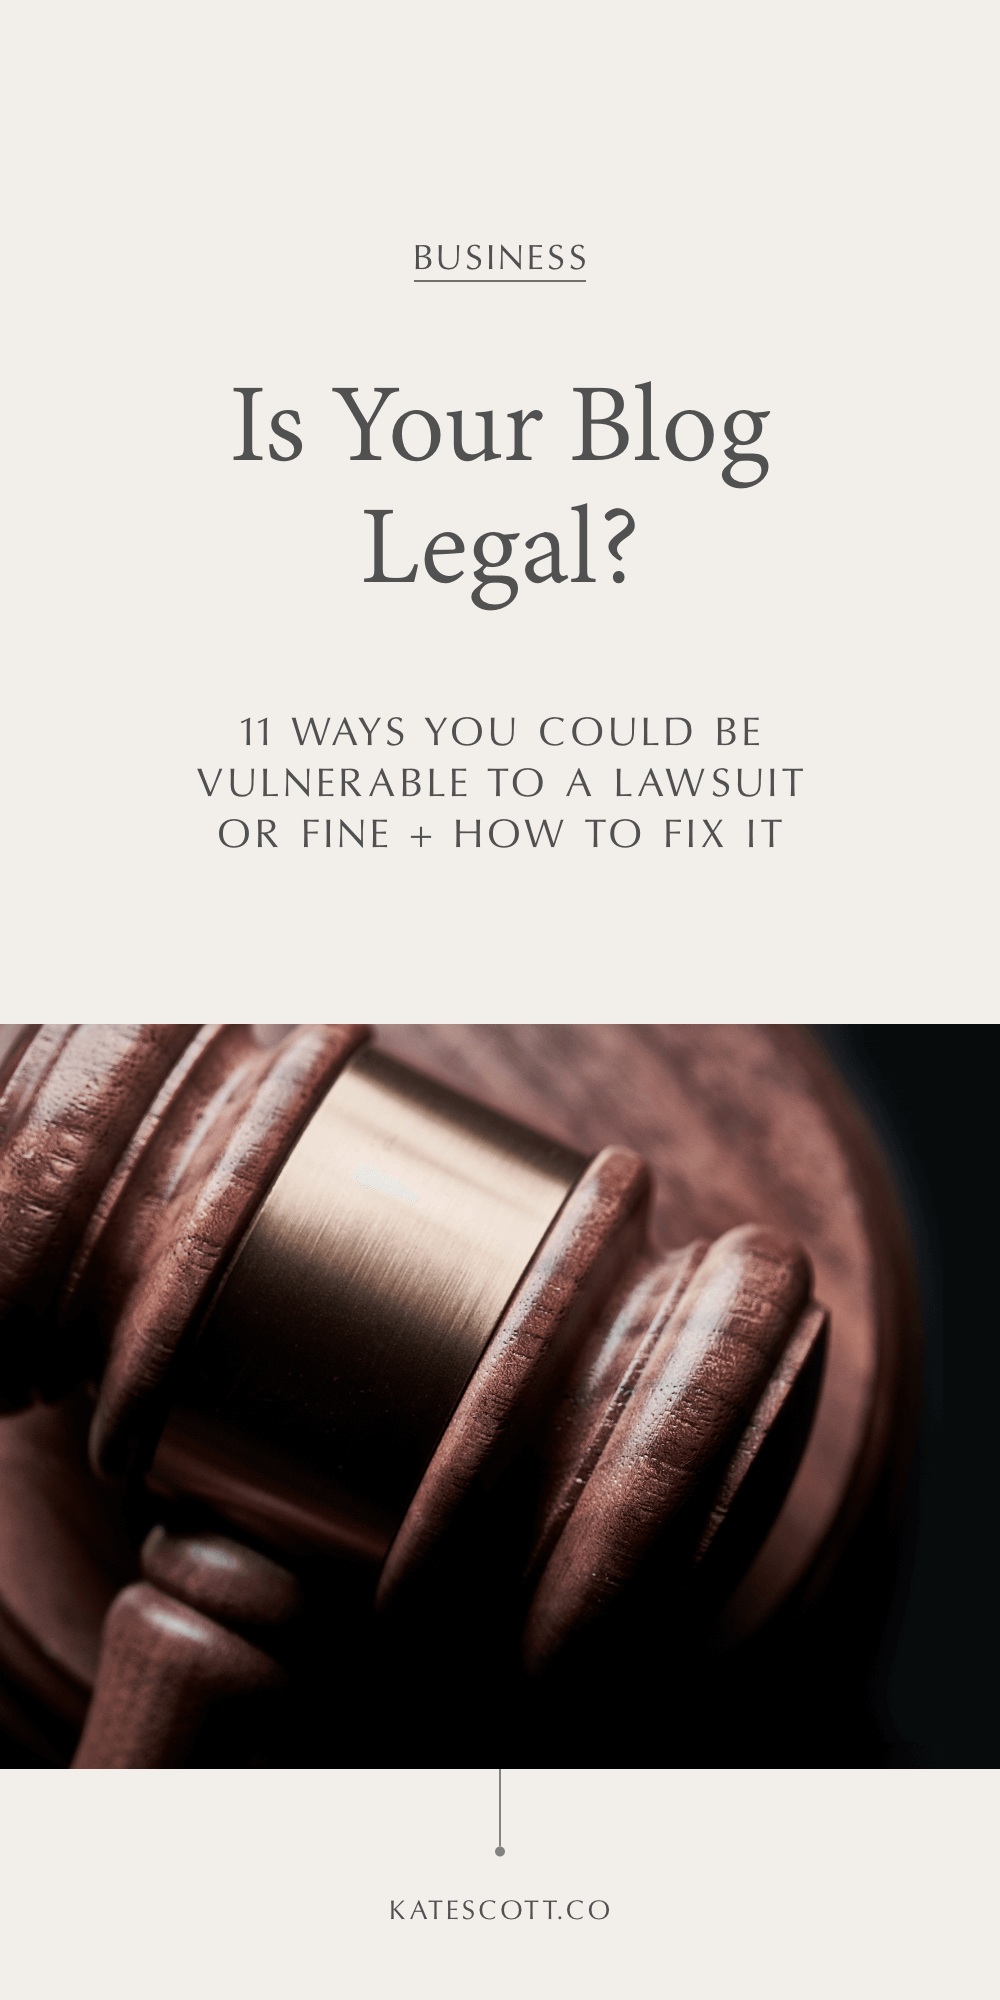 Worried about getting sued, fined, or audited for accidentally breaking the law with your blog? Avoid the wrath of the FCC, IRS, and USPTO gods by reading about these 9 common legal traps that could put a serious damper on your blog and biz. (Not to…